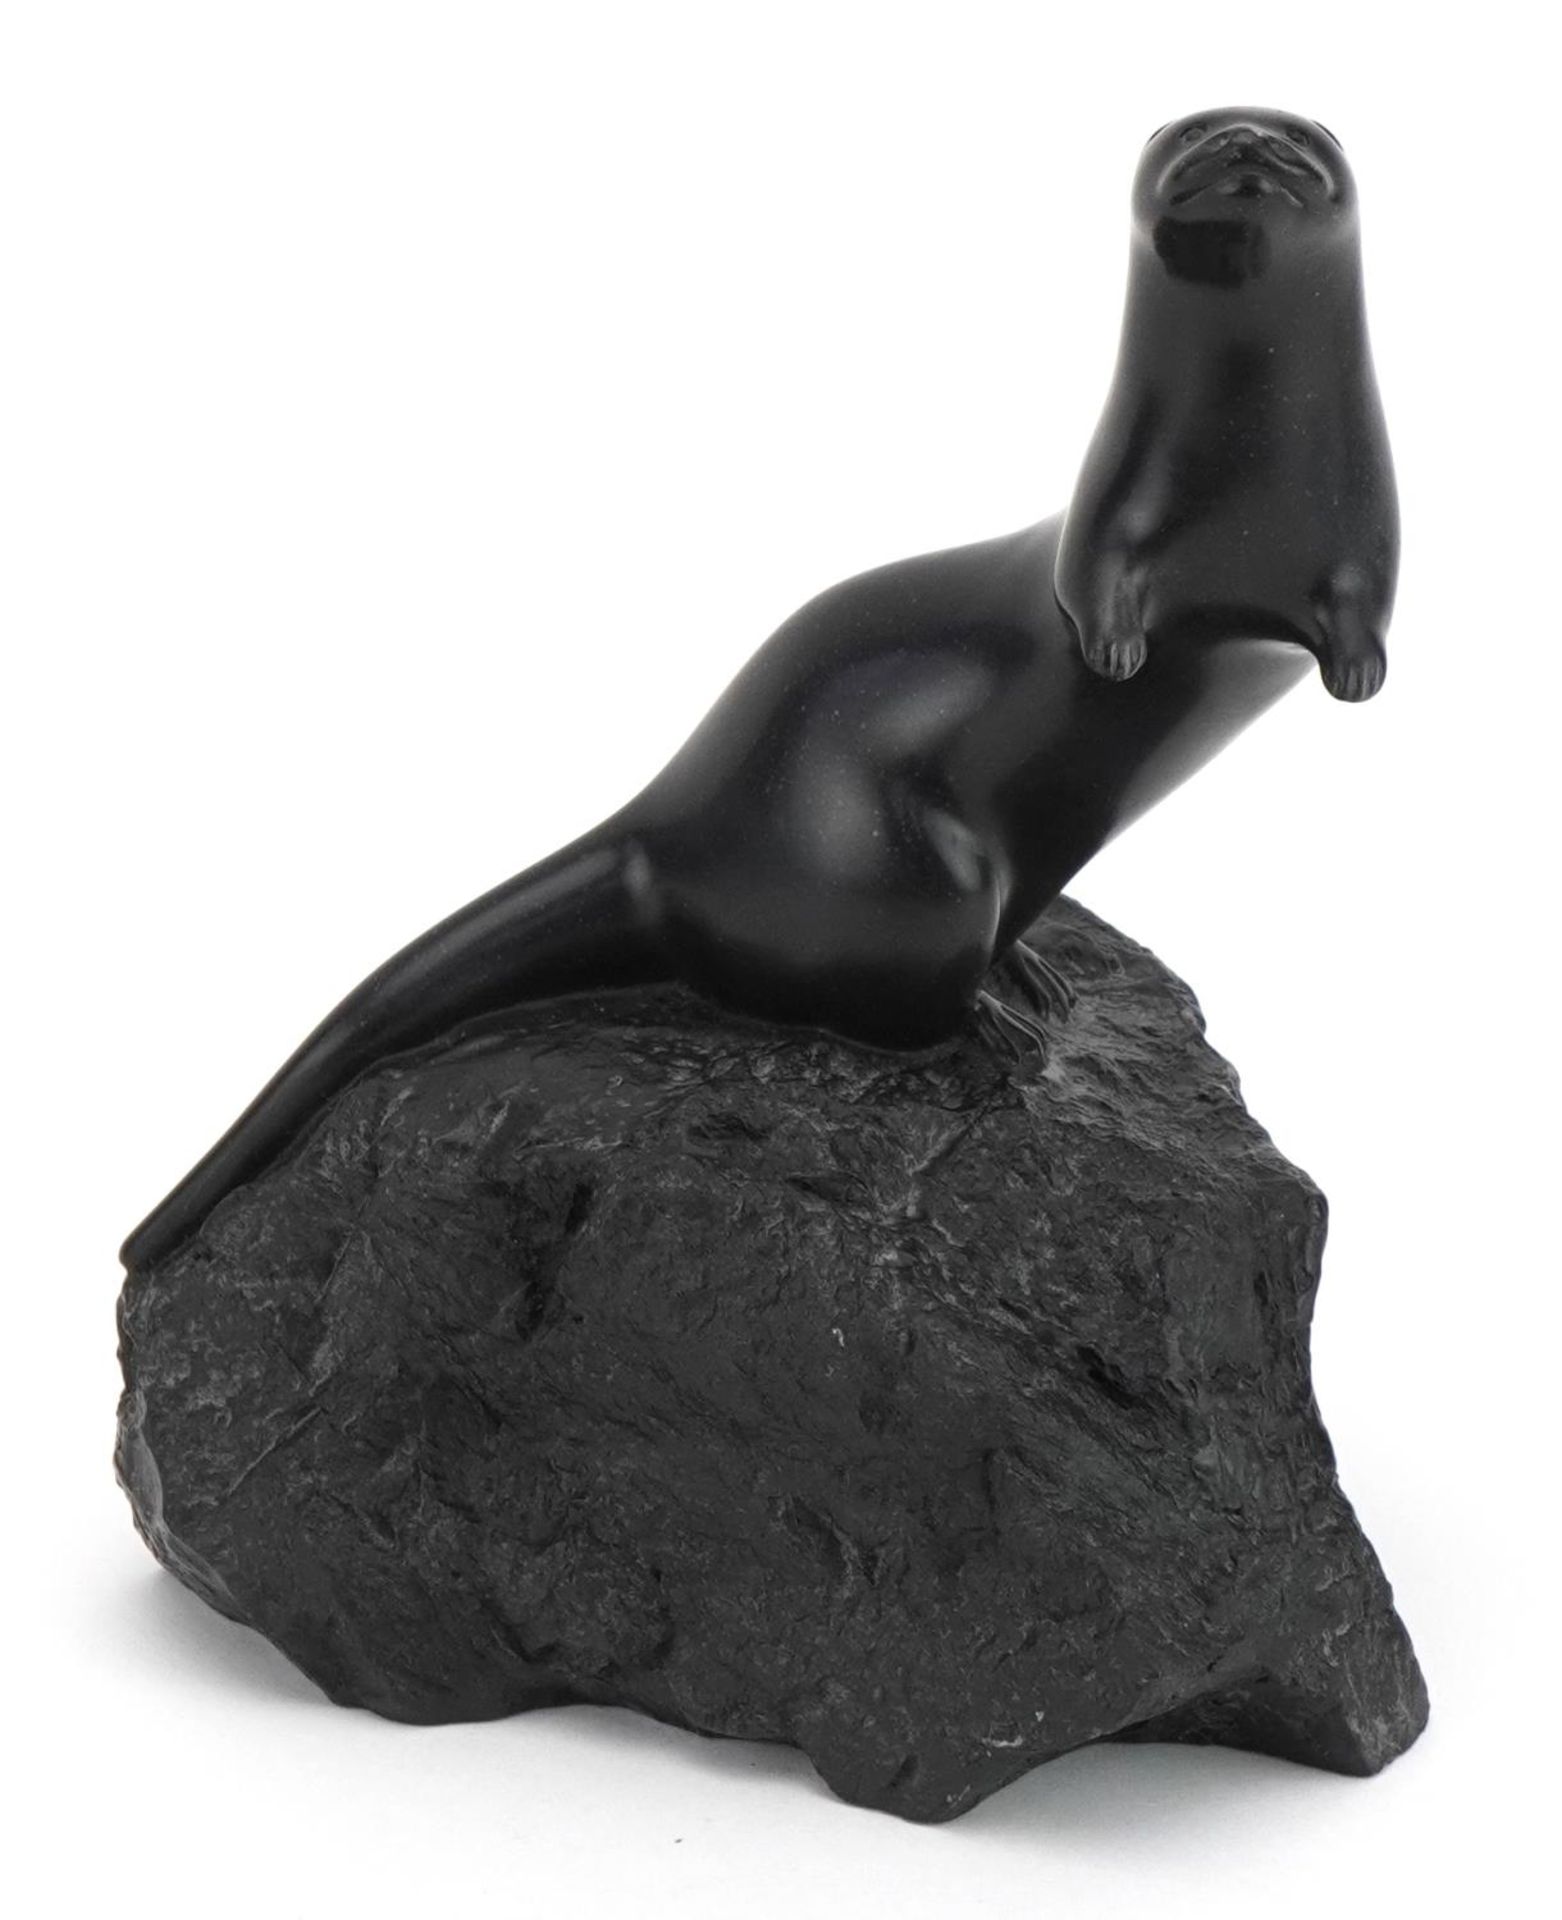 Inuit interest study of an otter, indistinctly signed, 19cm high : For further information on this